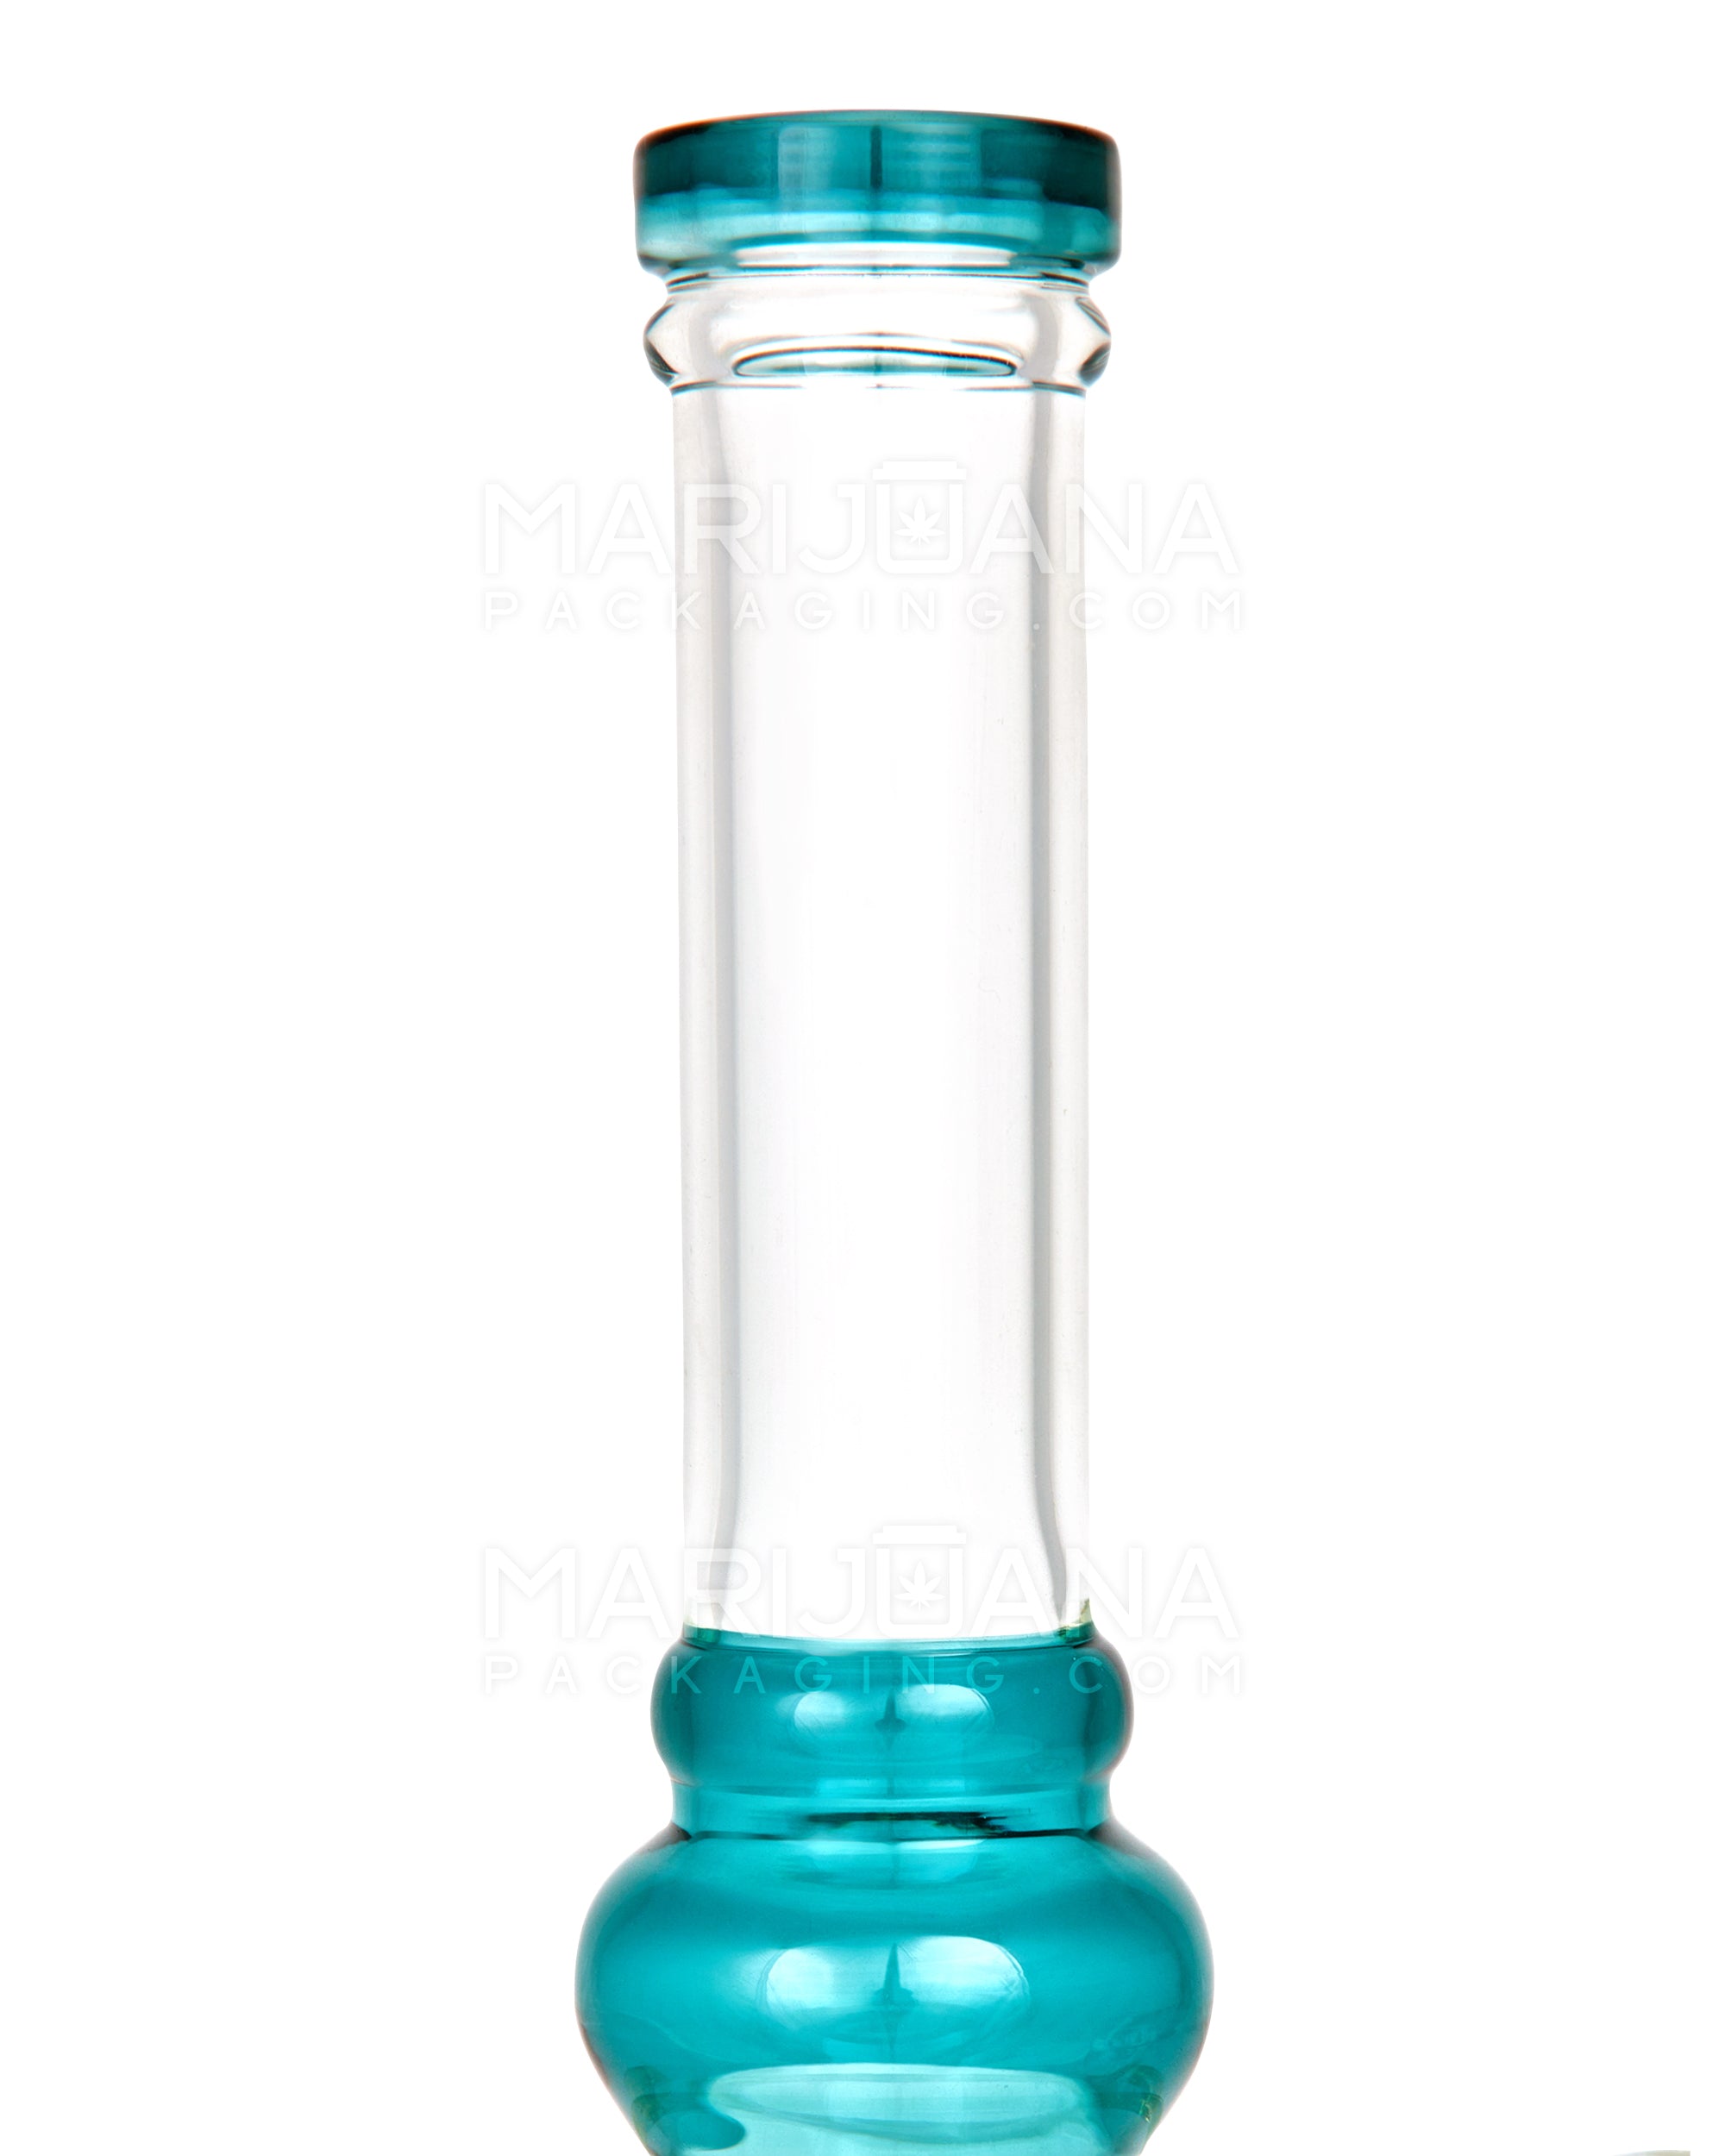 Double Chamber | Straight Neck Showerhead Perc Glass Water Pipe w/ Thick Base | 13in Tall - 18mm Bowl - Teal - 4